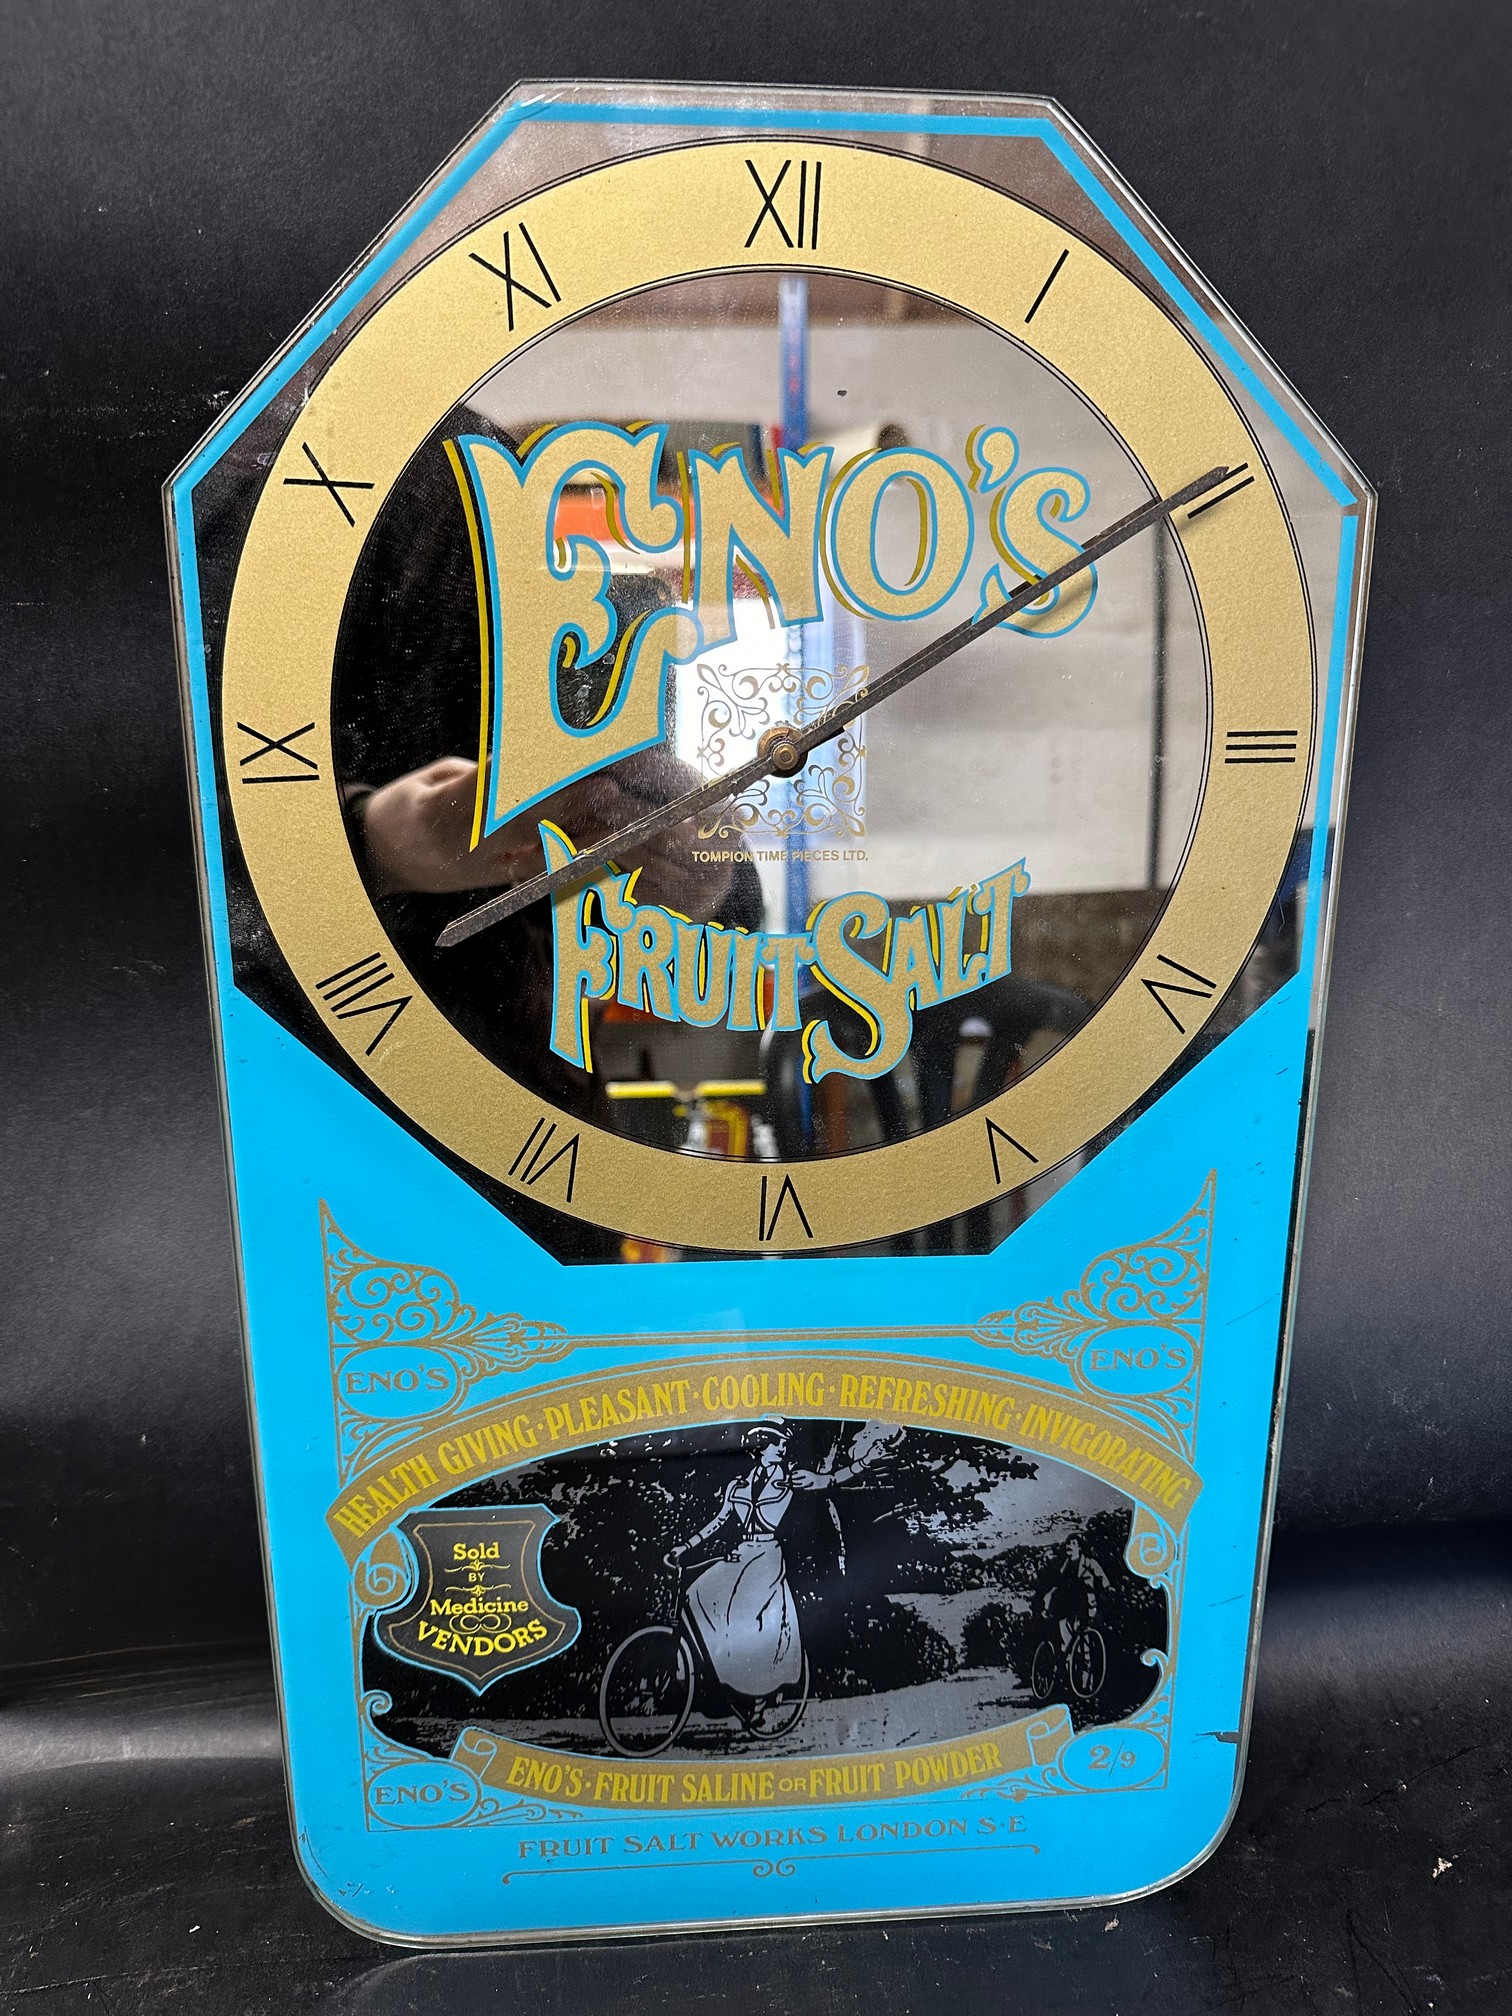 A mirrored advertising wall clock for Eno's Fruit Salt of London with image of cyclists to bottom